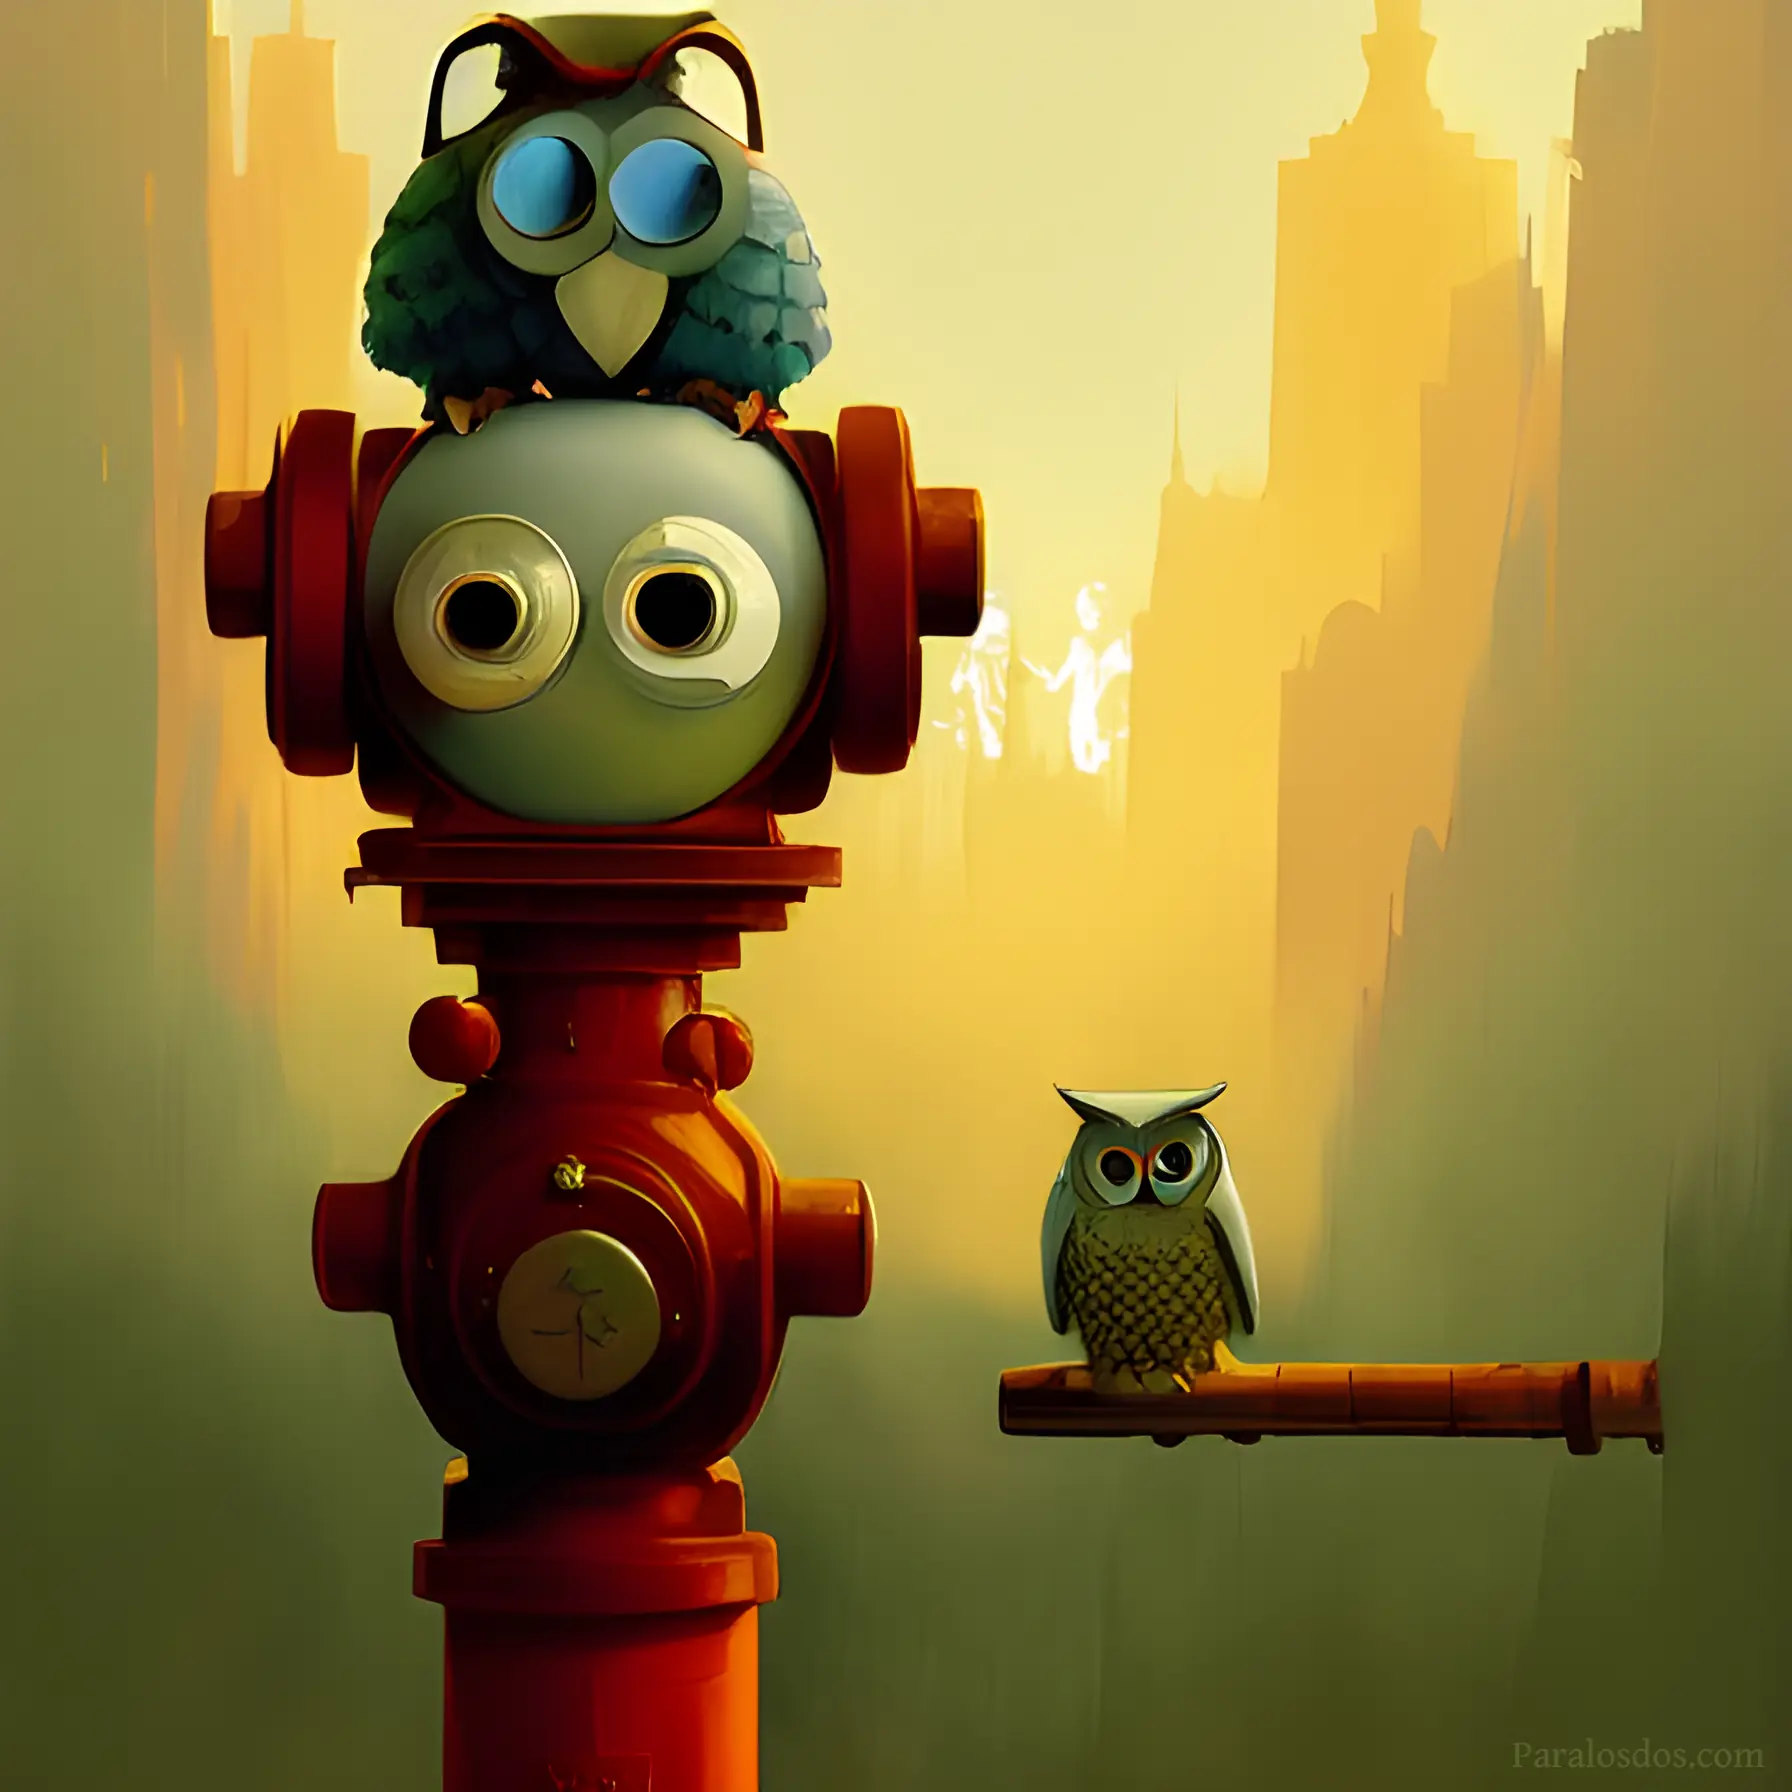 A fantastical artistic rendering of an owl on a fire hydrant beside a smaller owl perched on a pipe that is suspended magically in mid air.